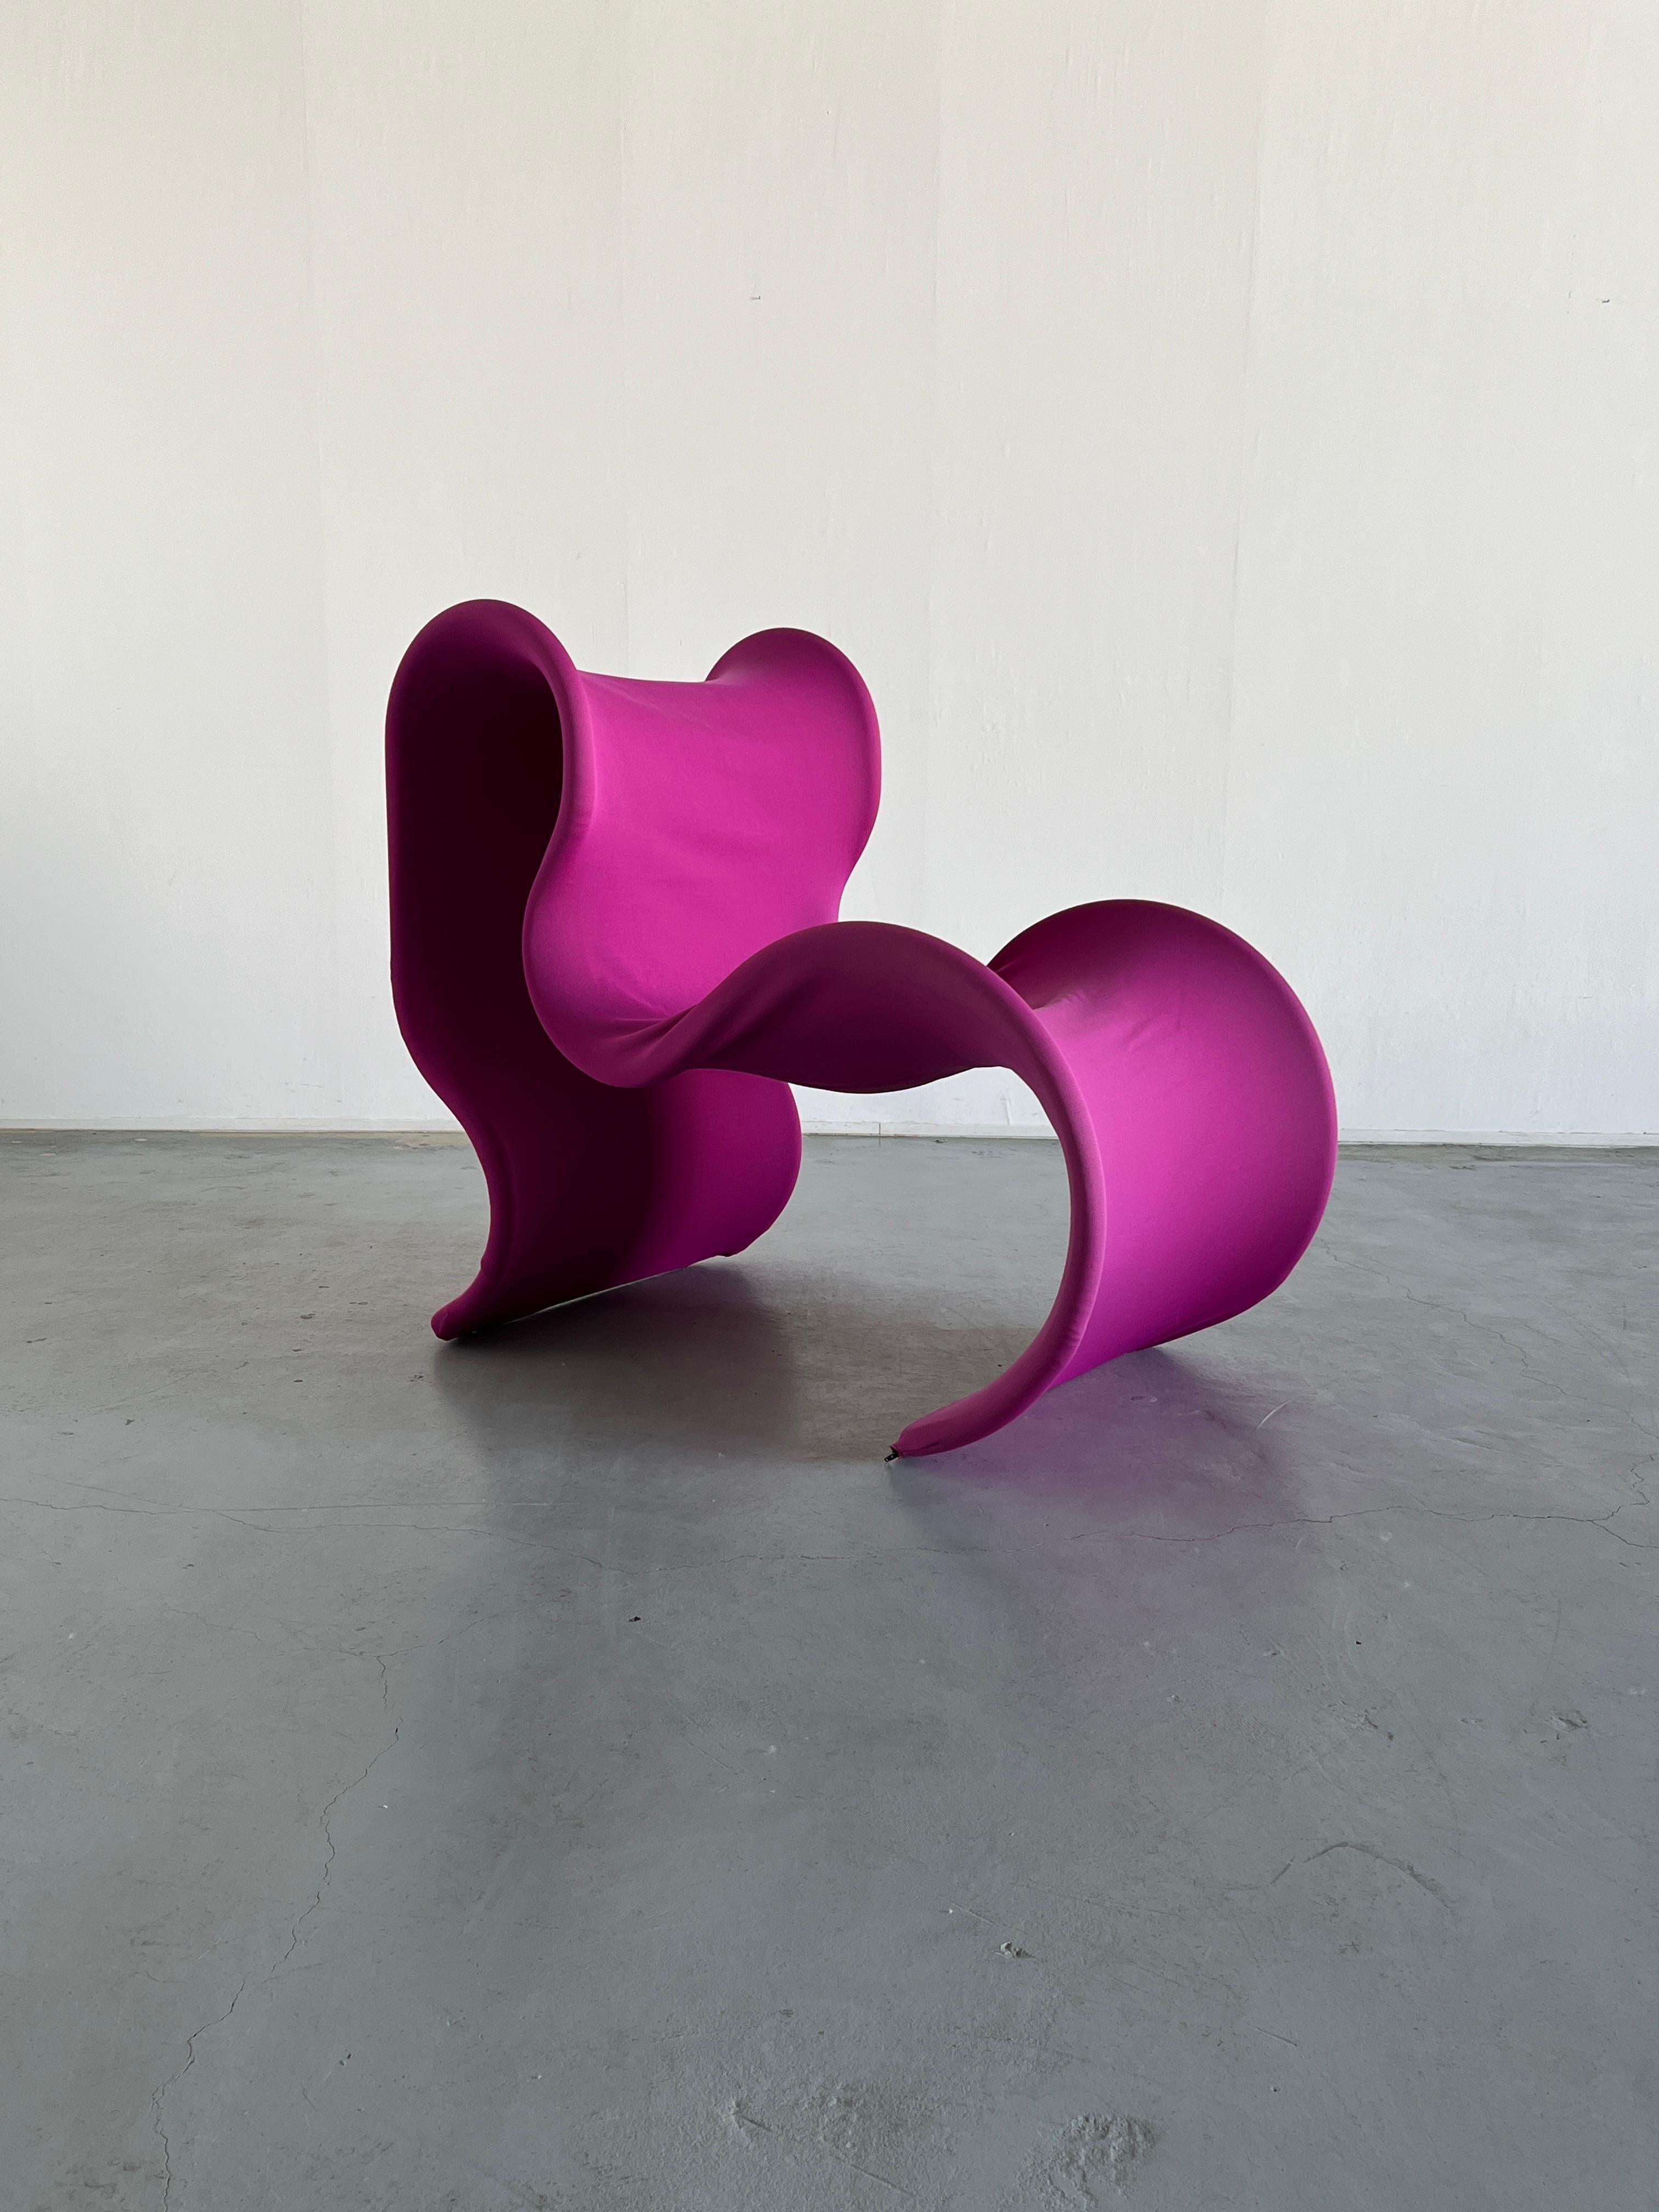 Beautiful Fiocco lounge chair produced by Busnelli, born in 1970 from the design by Gianni Pareschi.
Two metal profiles run parallel describing in space wide and sinuous lines. Between them is placed an elastic fabric of a bright pink color that